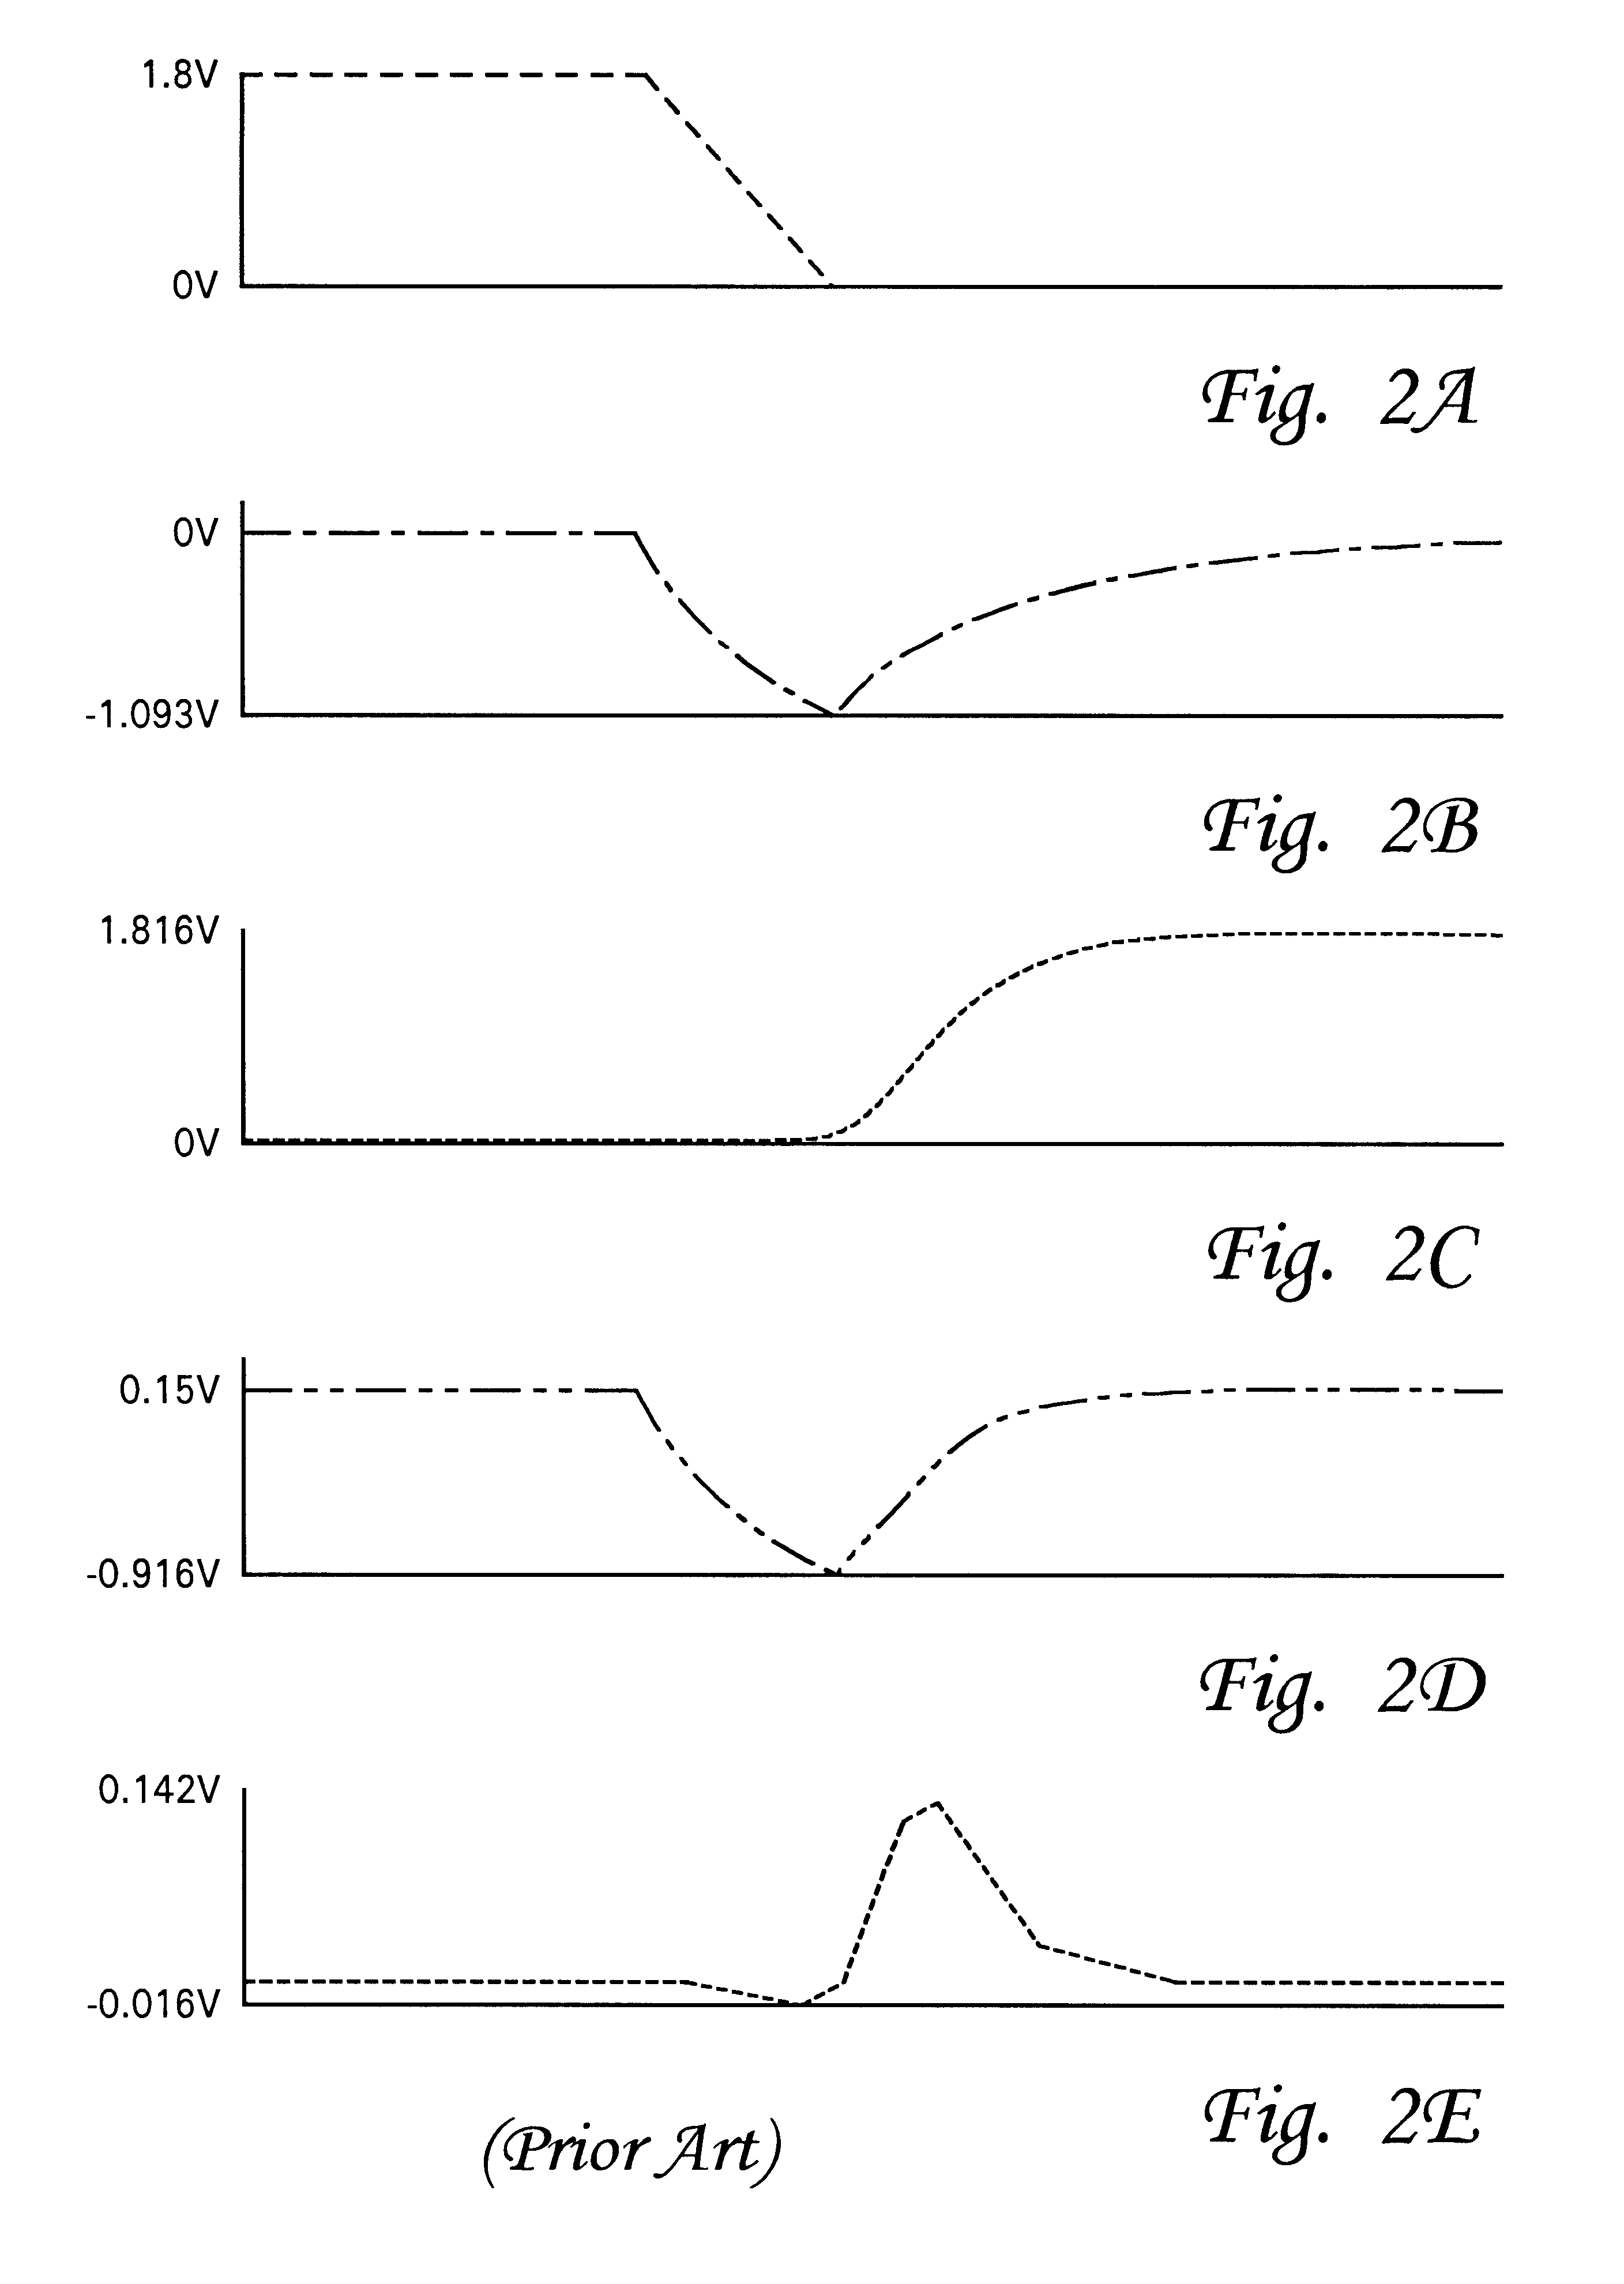 Noise suppression circuits for suppressing noises above and below reference voltages